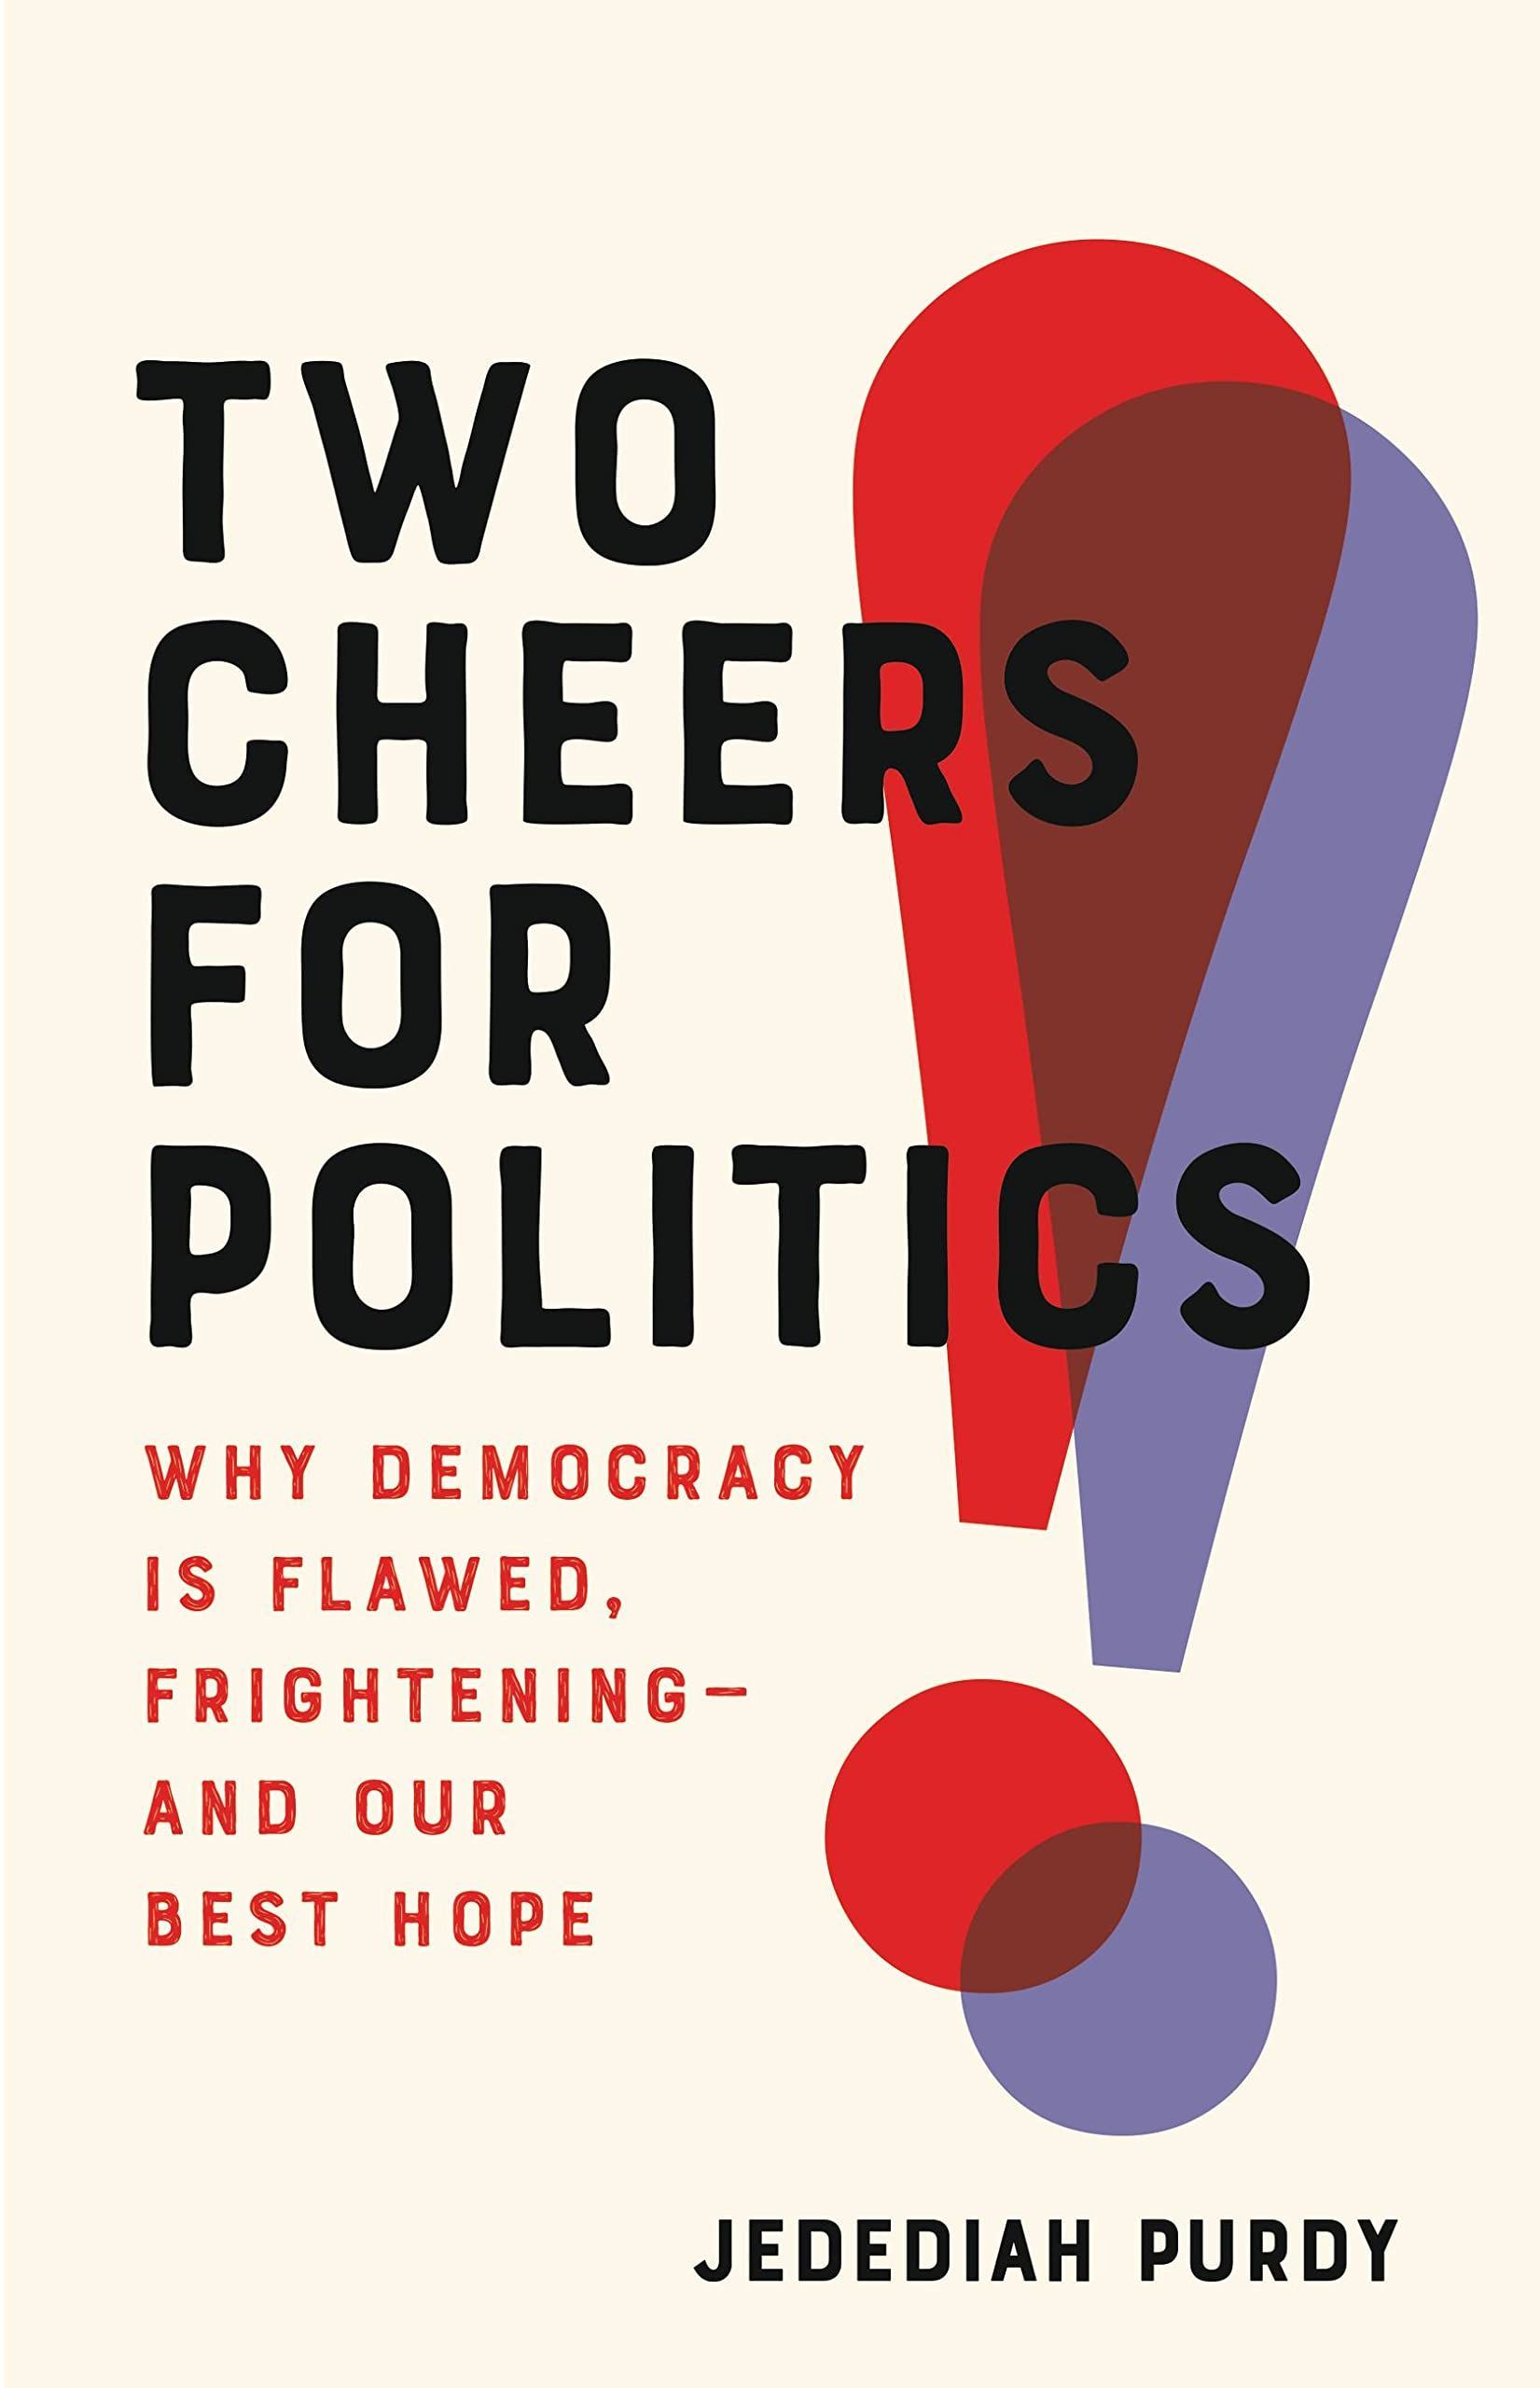 Constitutional Revival: On Jedediah Purdy’s “Two Cheers for Politics”